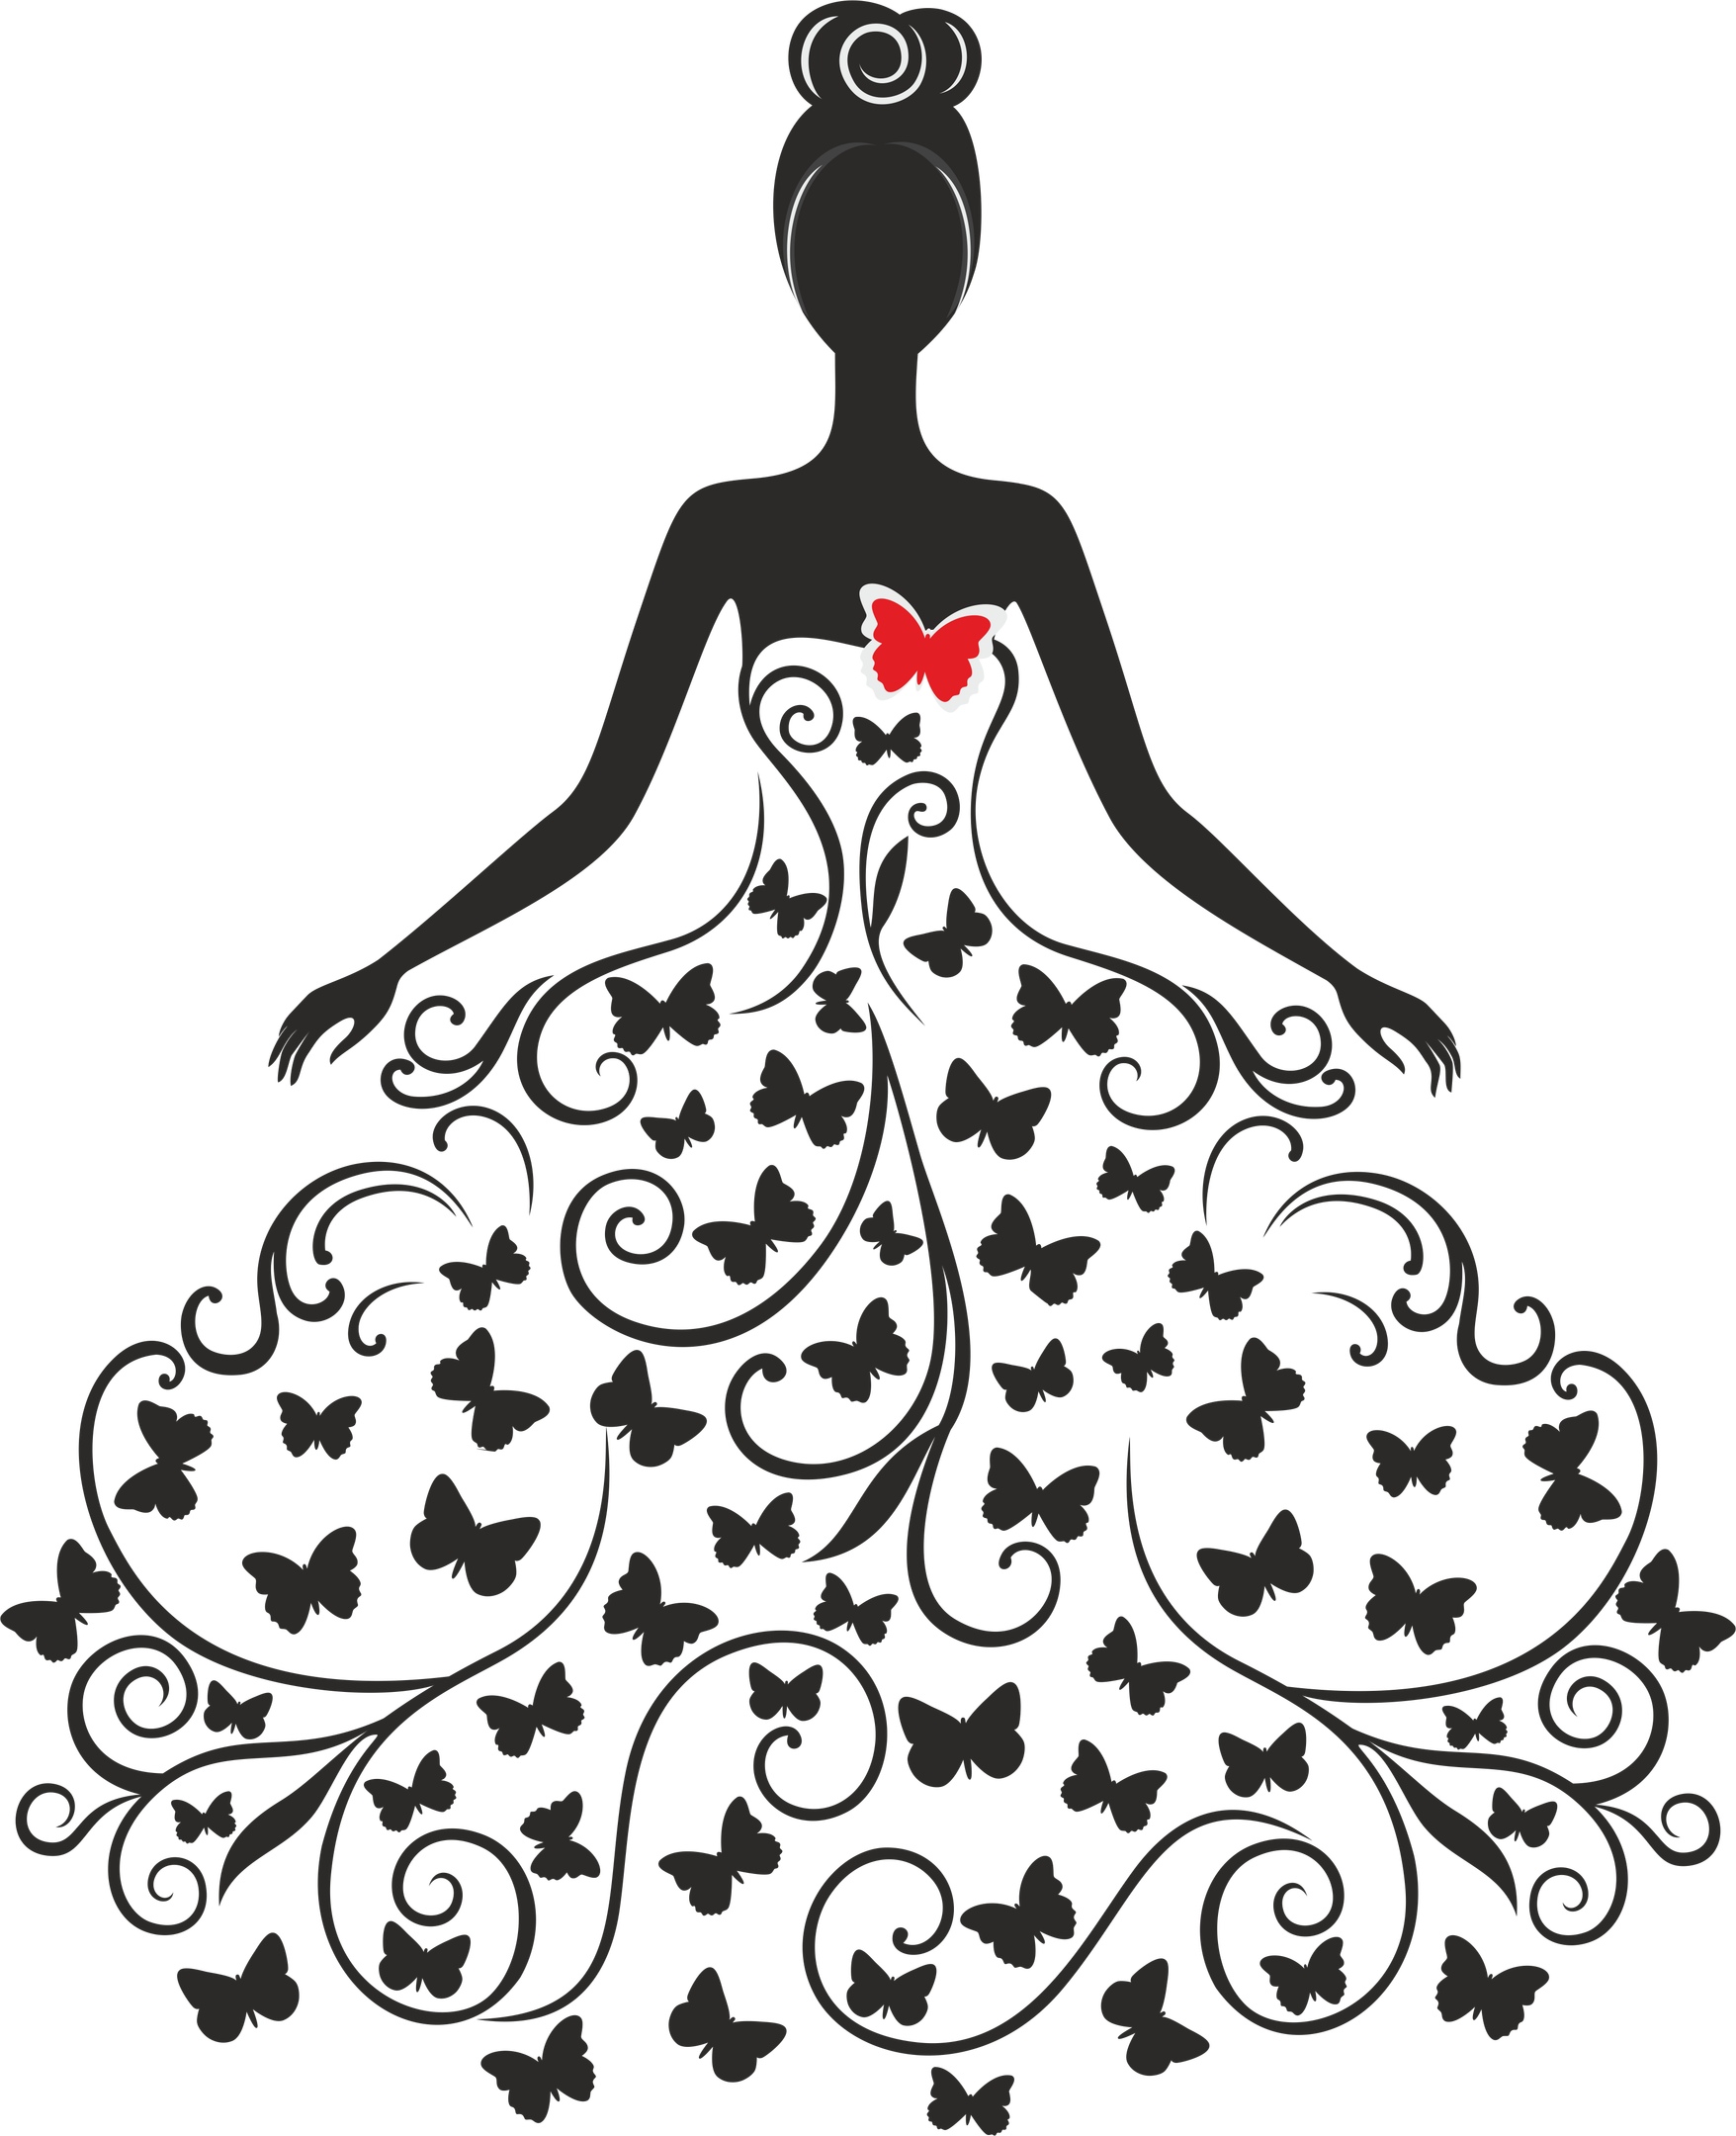 Download Wedding Silhouette Free Vector cdr Download - 3axis.co